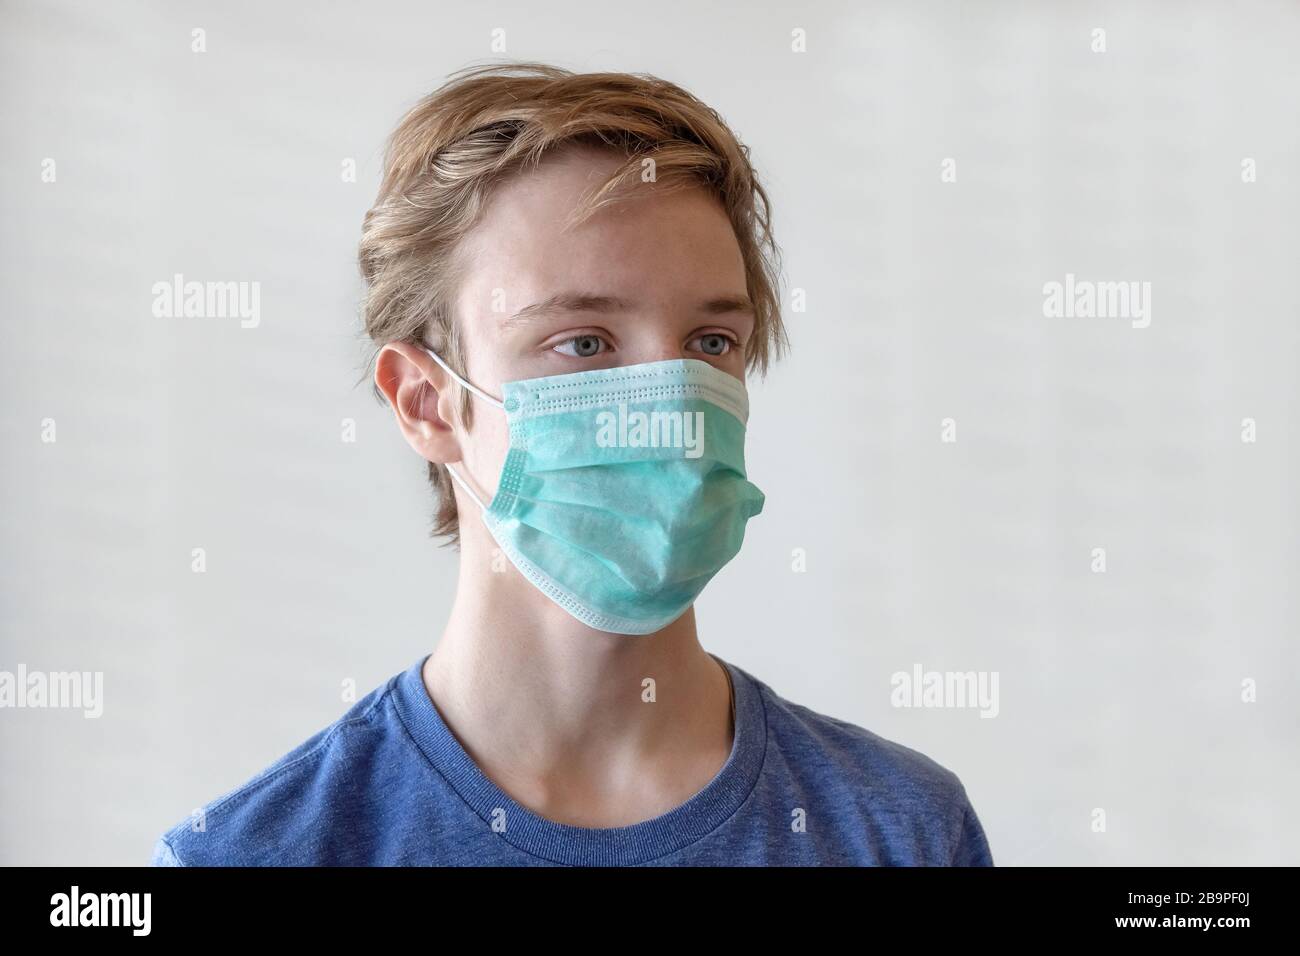 COVID-19 coronavirus. Portrait of an young man, 17 years old, in a medical mask. Stock Photo